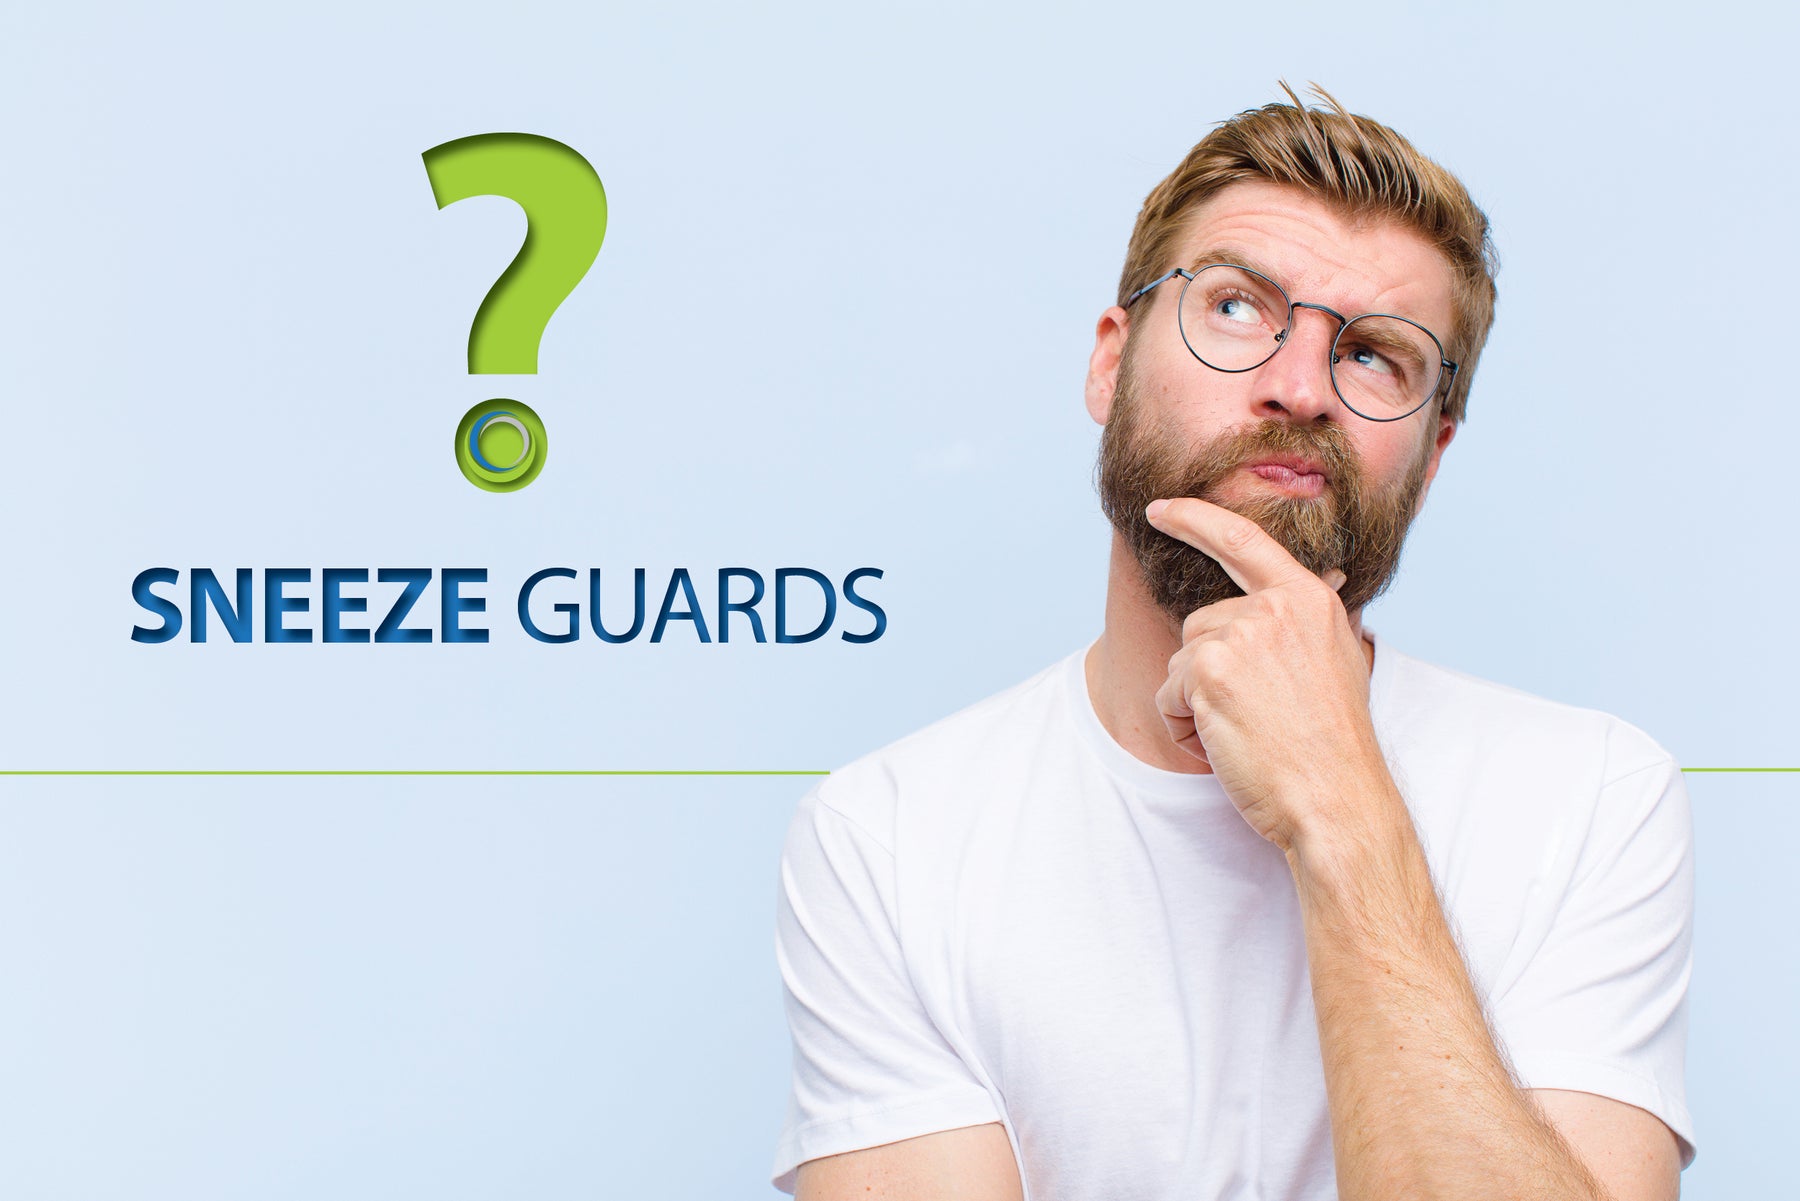 How Do I Choose the Right Sneeze Guard?